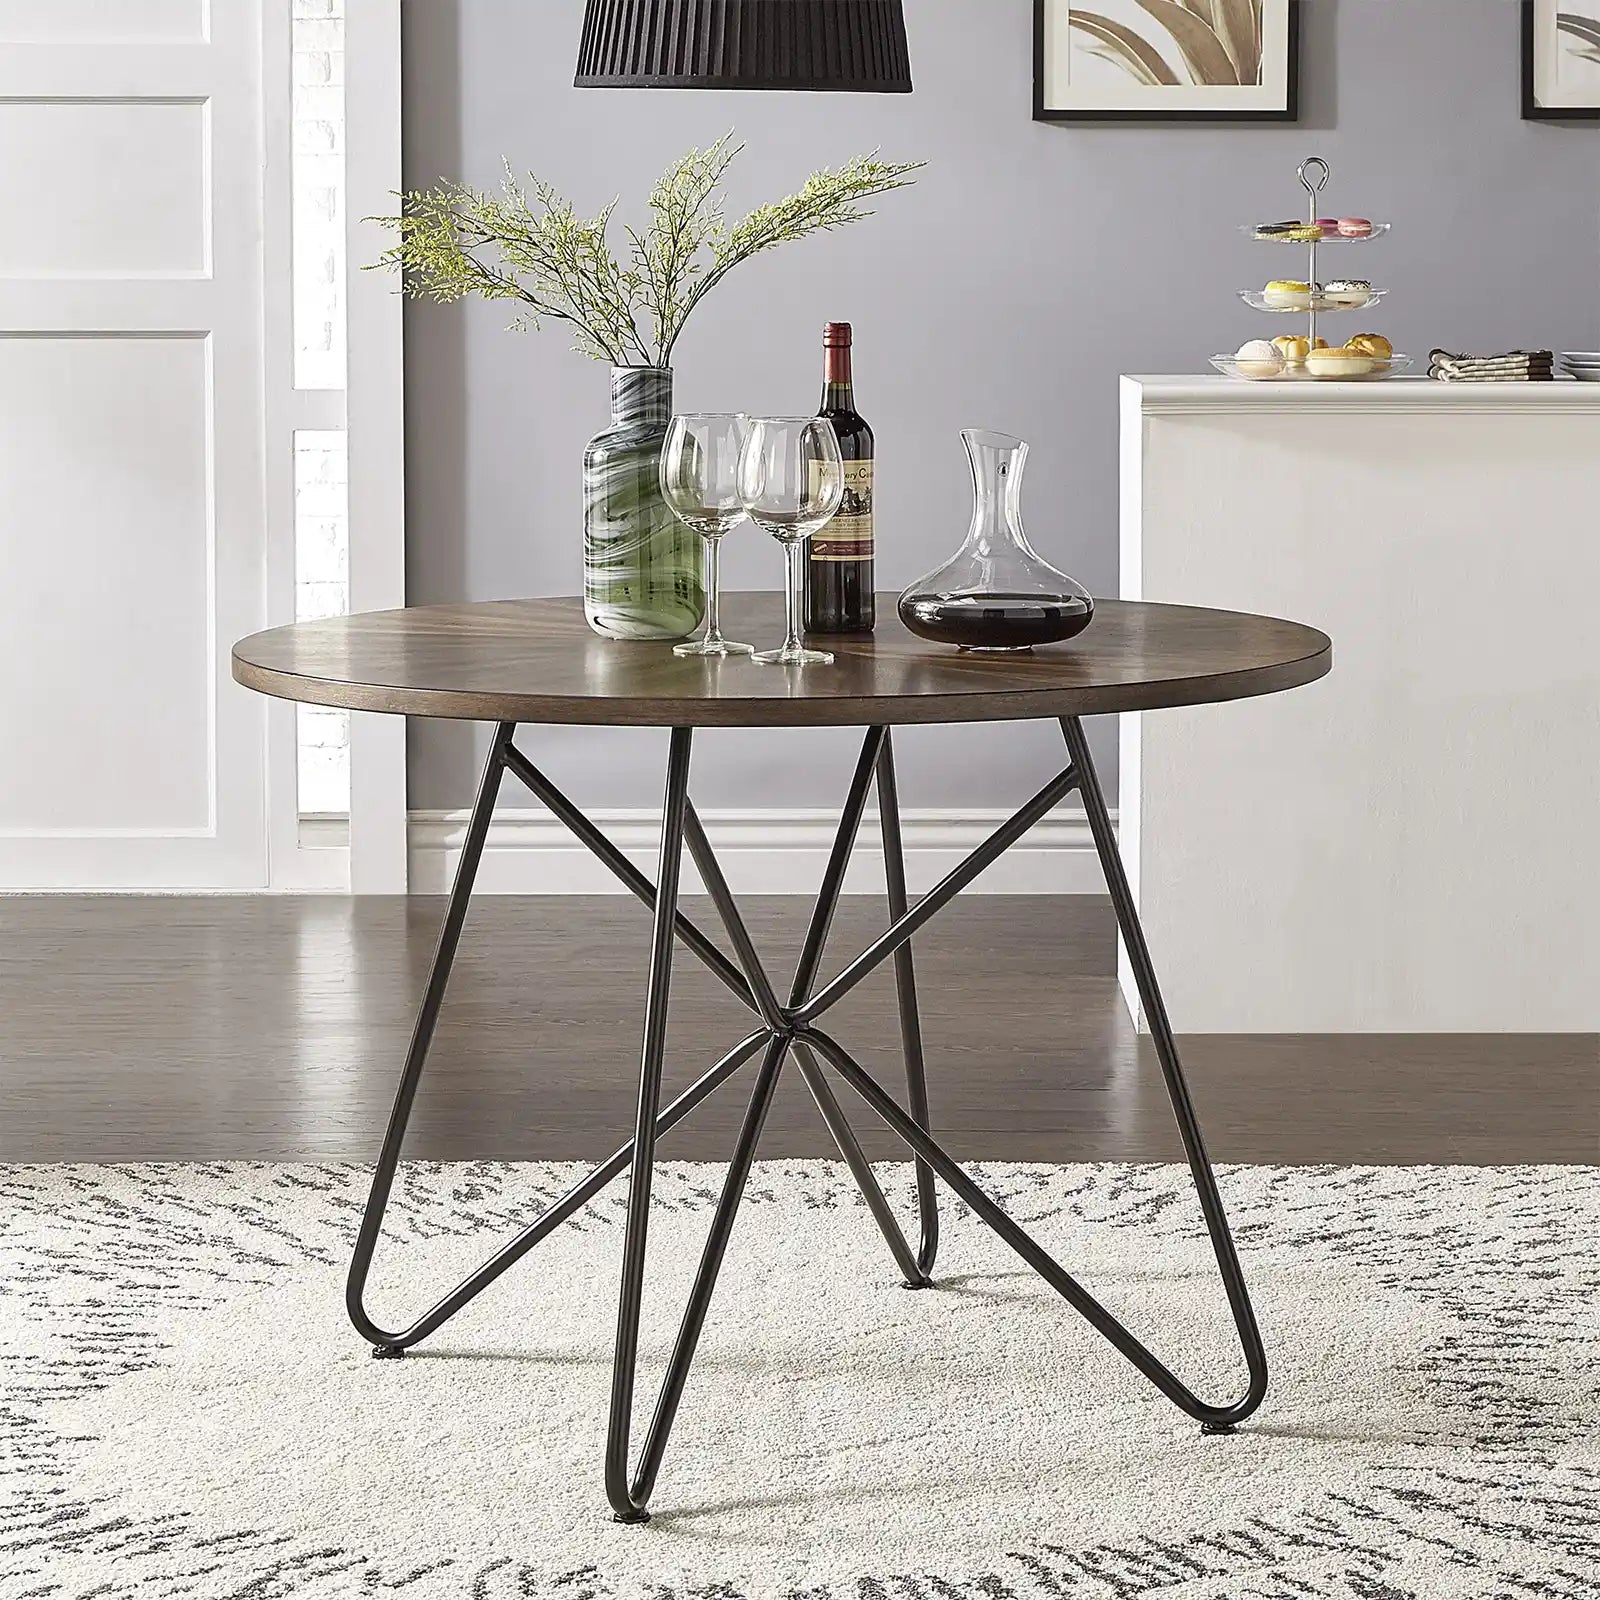 Wood 42 inch Round Dining Table with Black Iron Legs, Walnut Finish